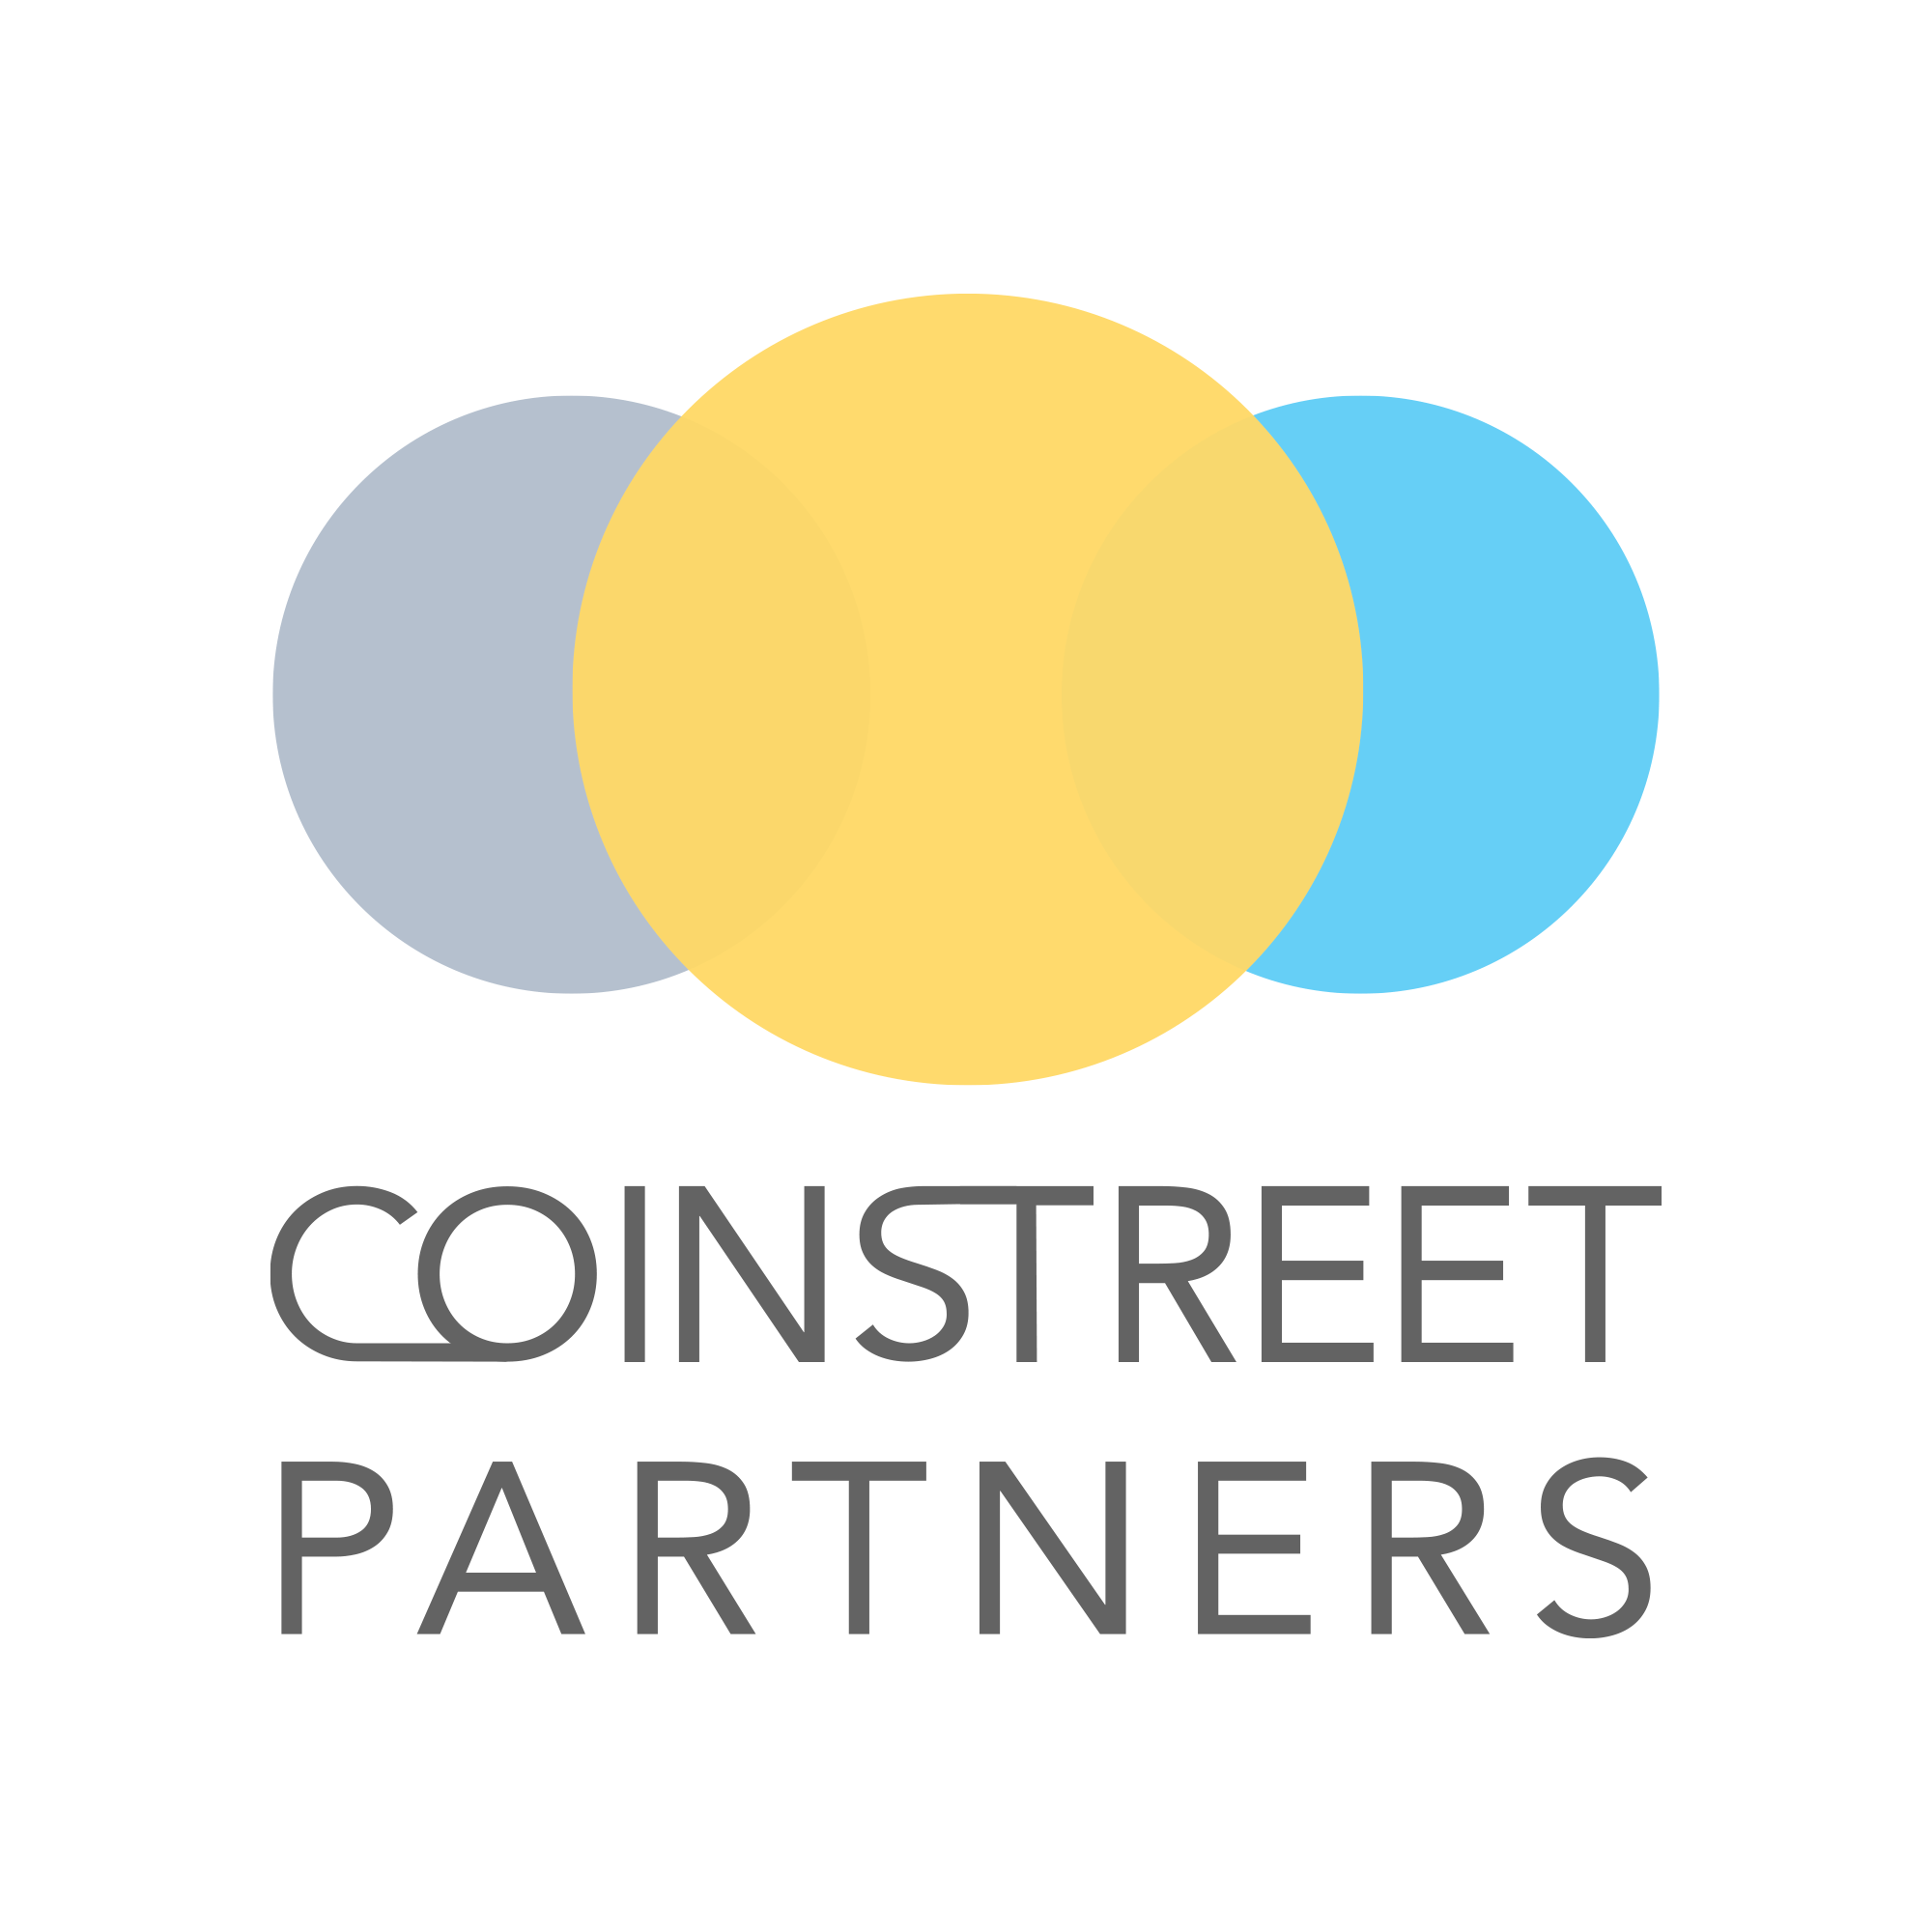 Coinstreet Partners consulting